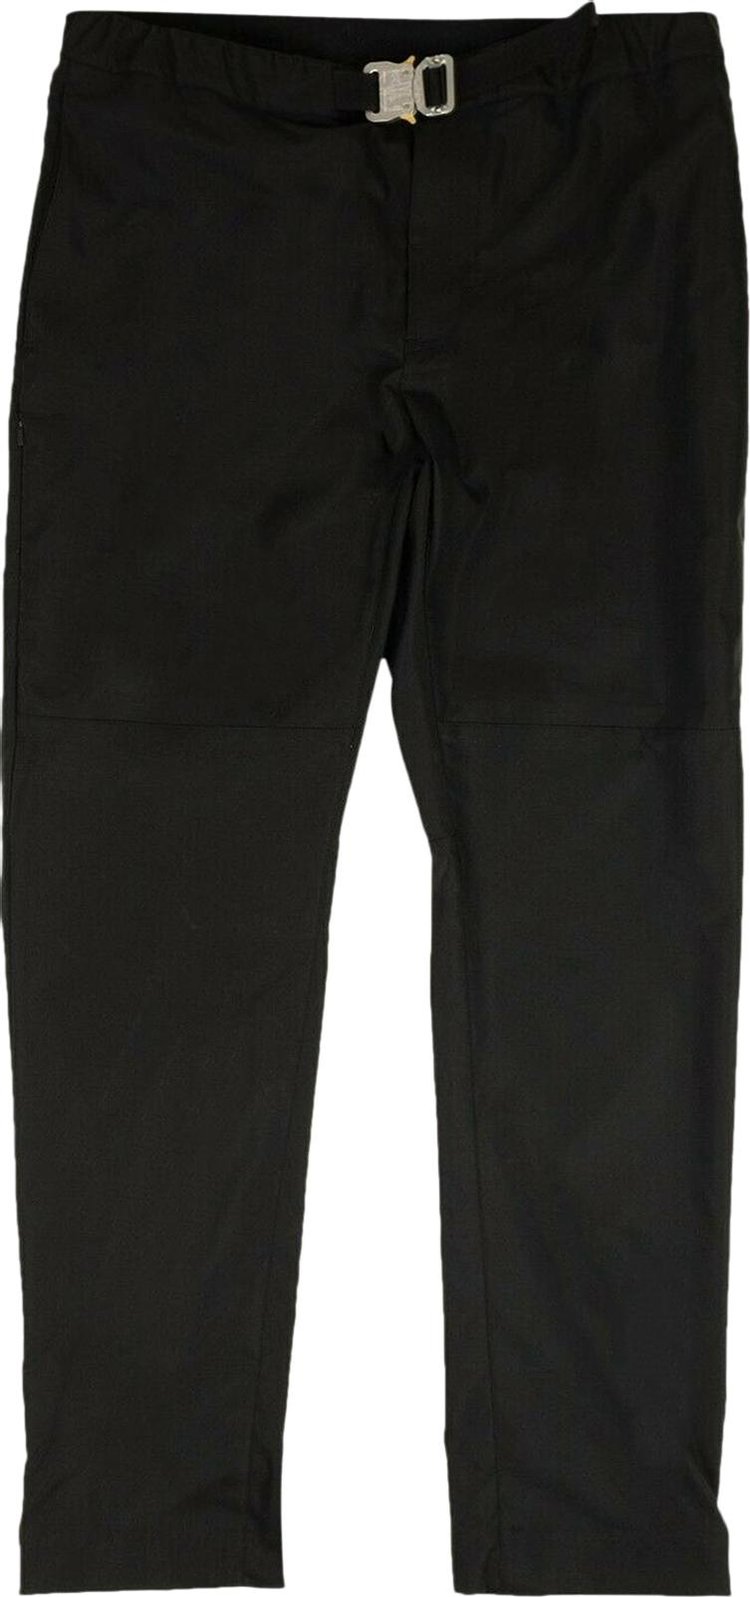 Moncler Genius x 1017 ALYX 9SM Buckle Fastened Track Trousers 'Black'